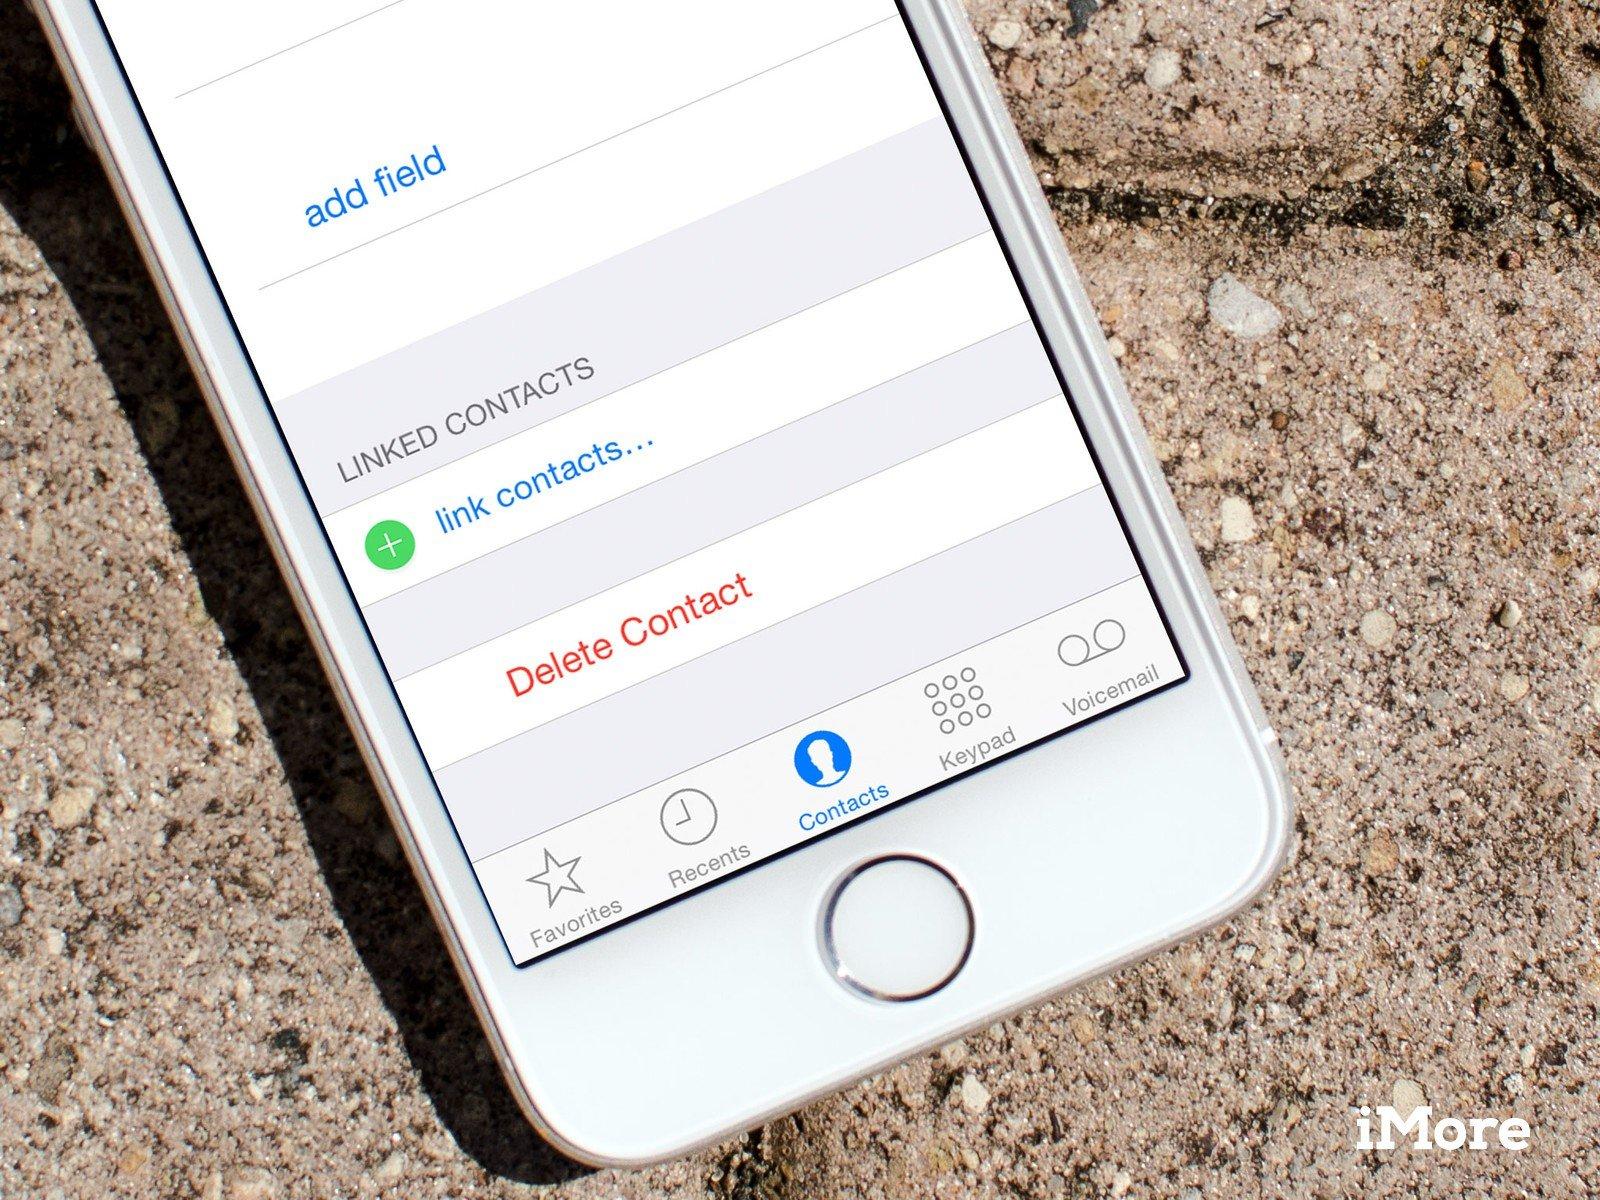 How to delete all contacts on iPhone?